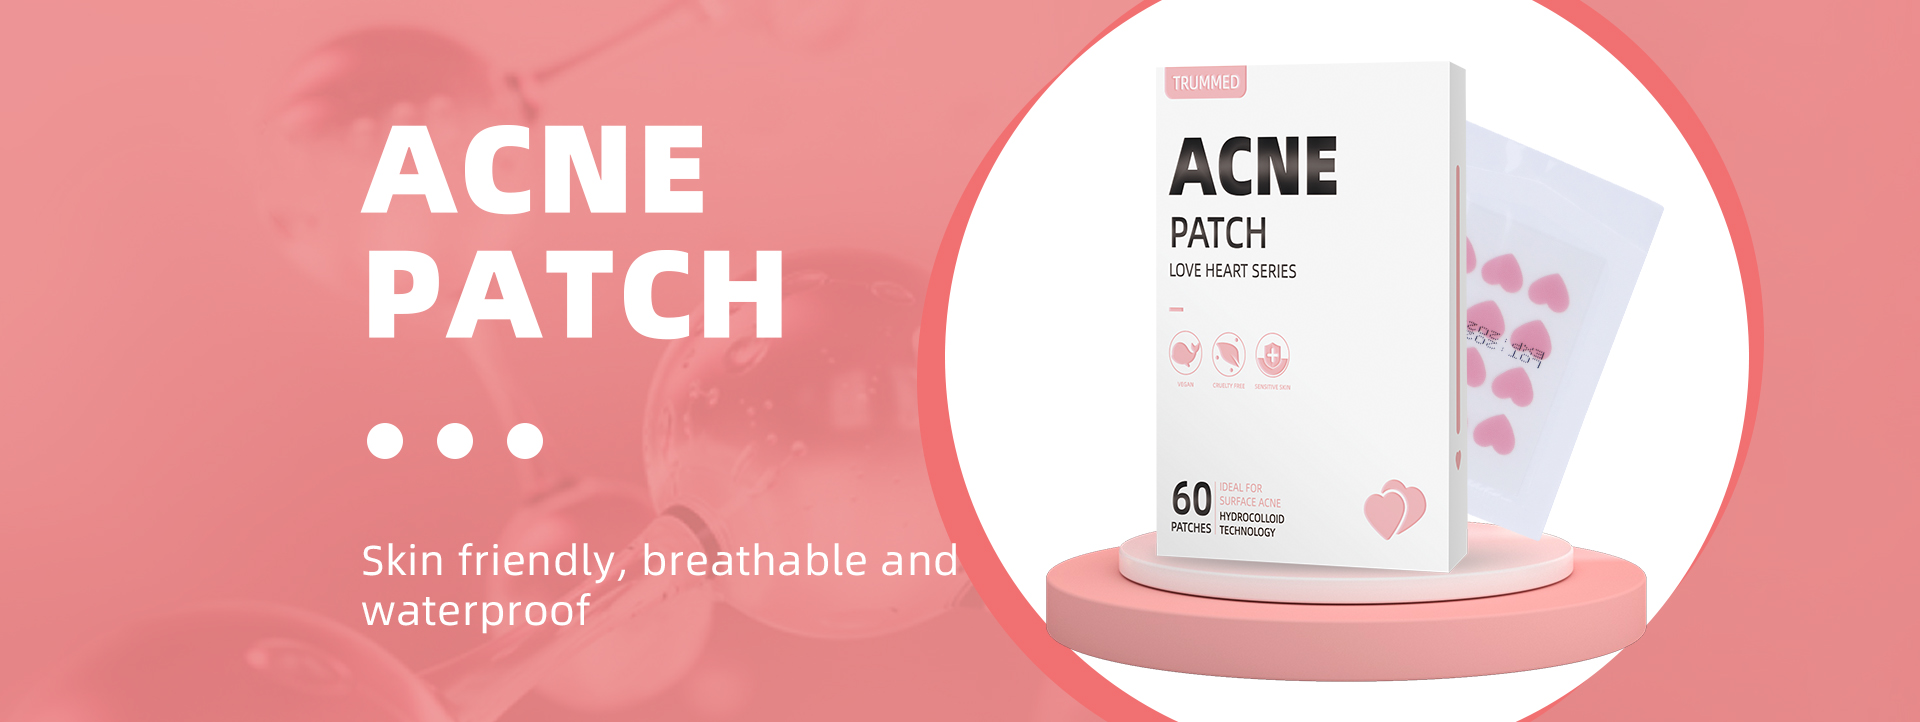 Acne patch,Pimple patch,Mighty patch